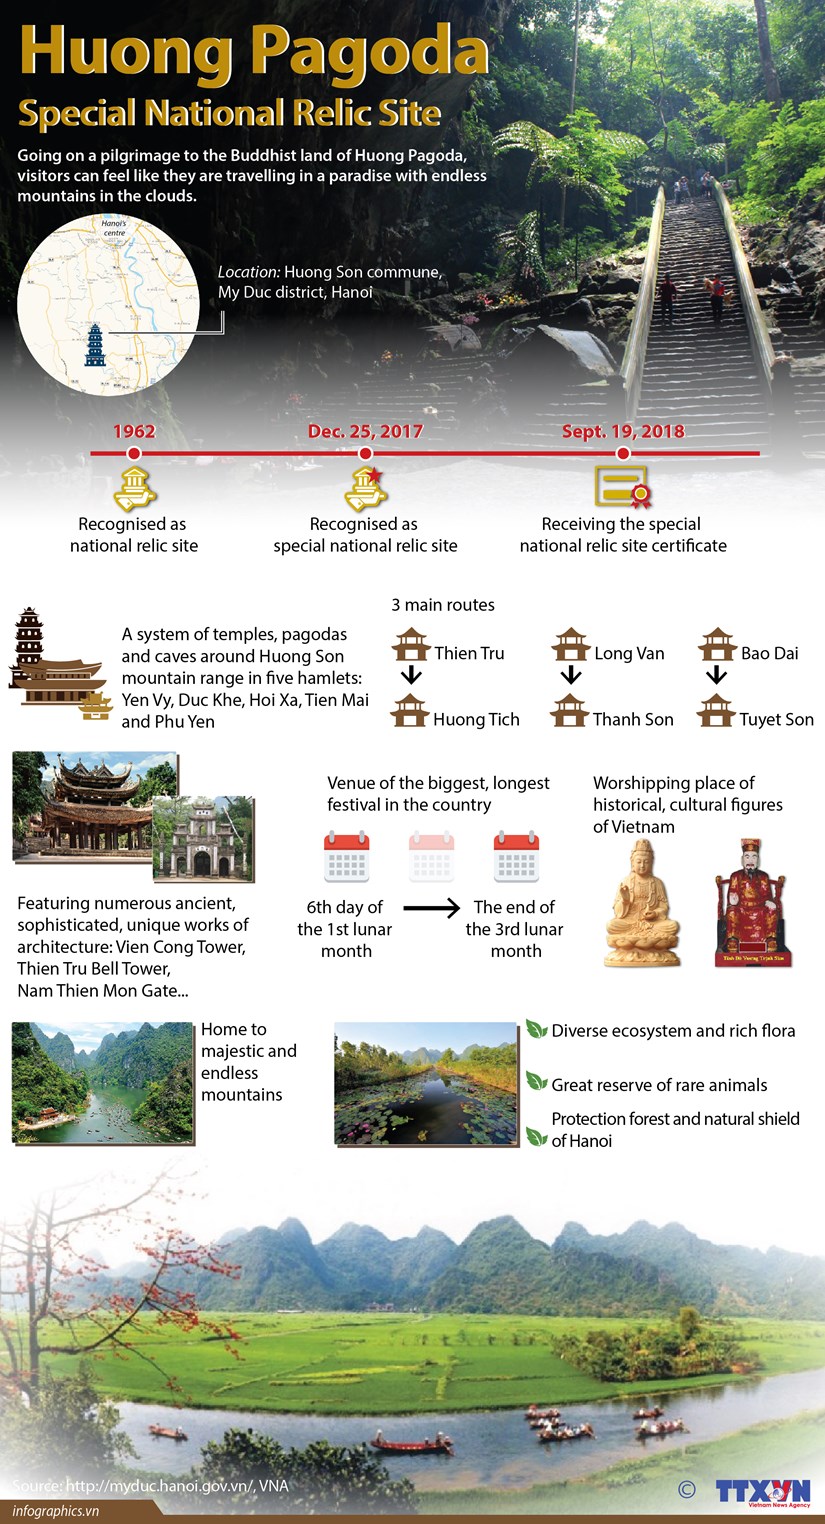 Huong Pagoda – Special National Relic Site hinh anh 1